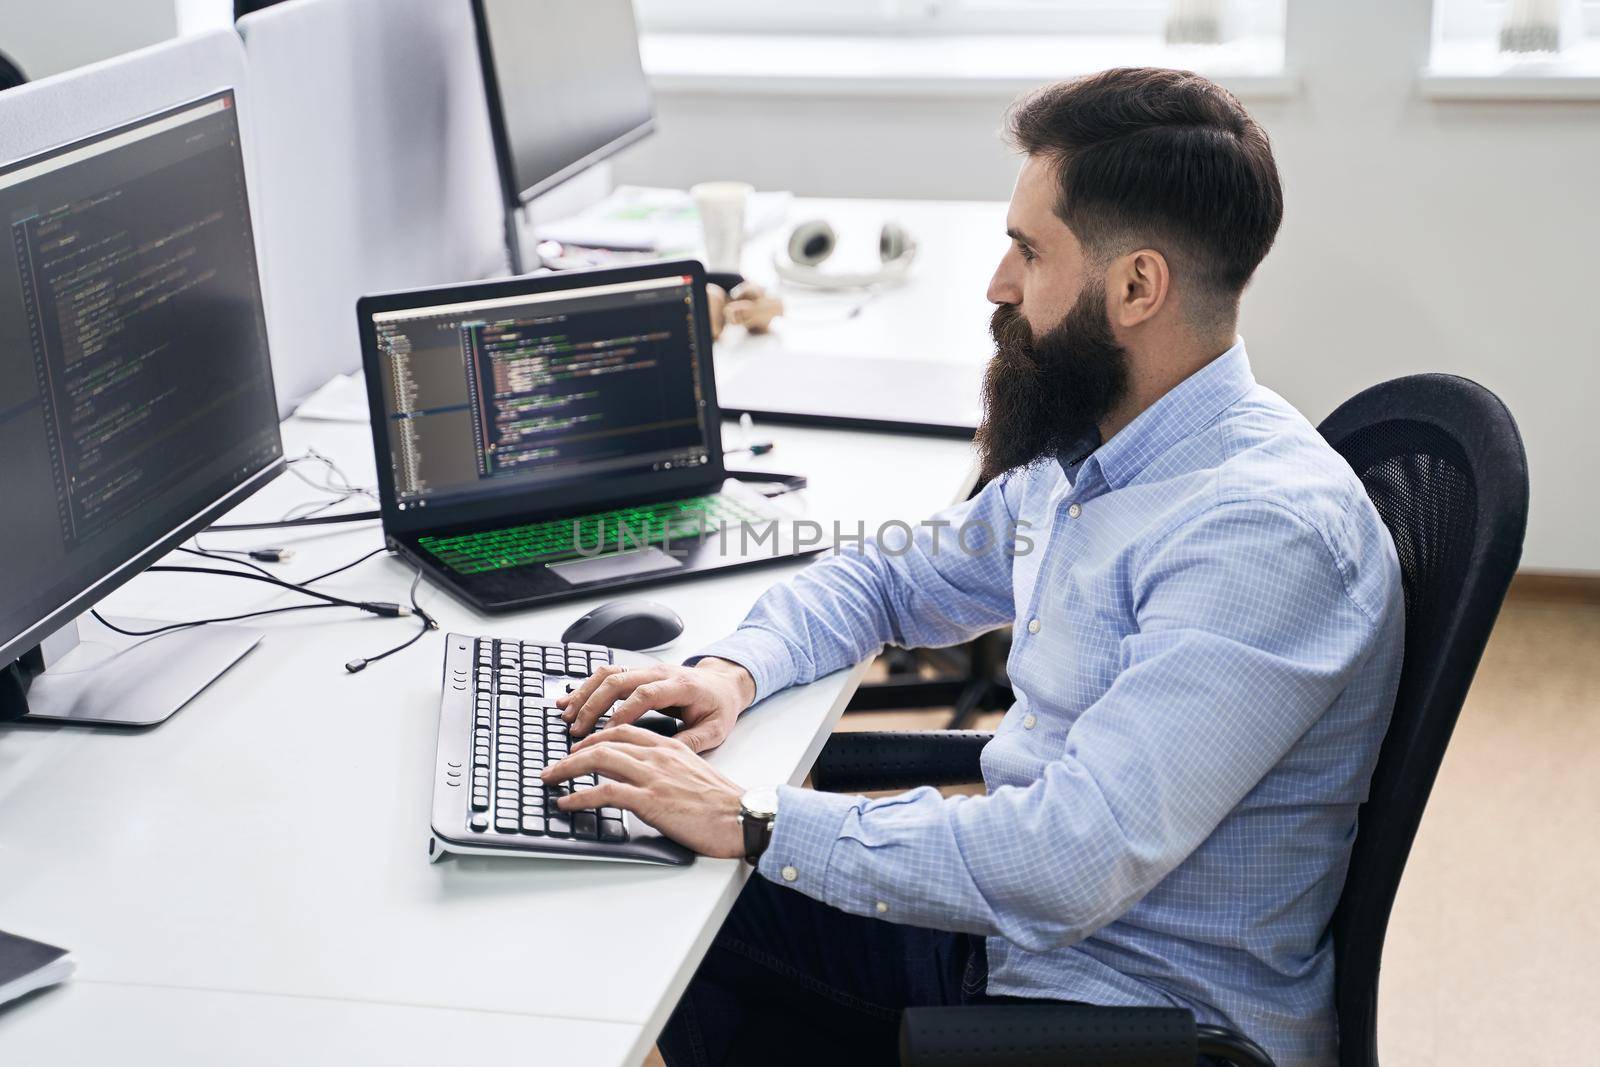 Senior developer working on computer in IT office, sitting at desk and coding, working on a project in software development company or technology startup.